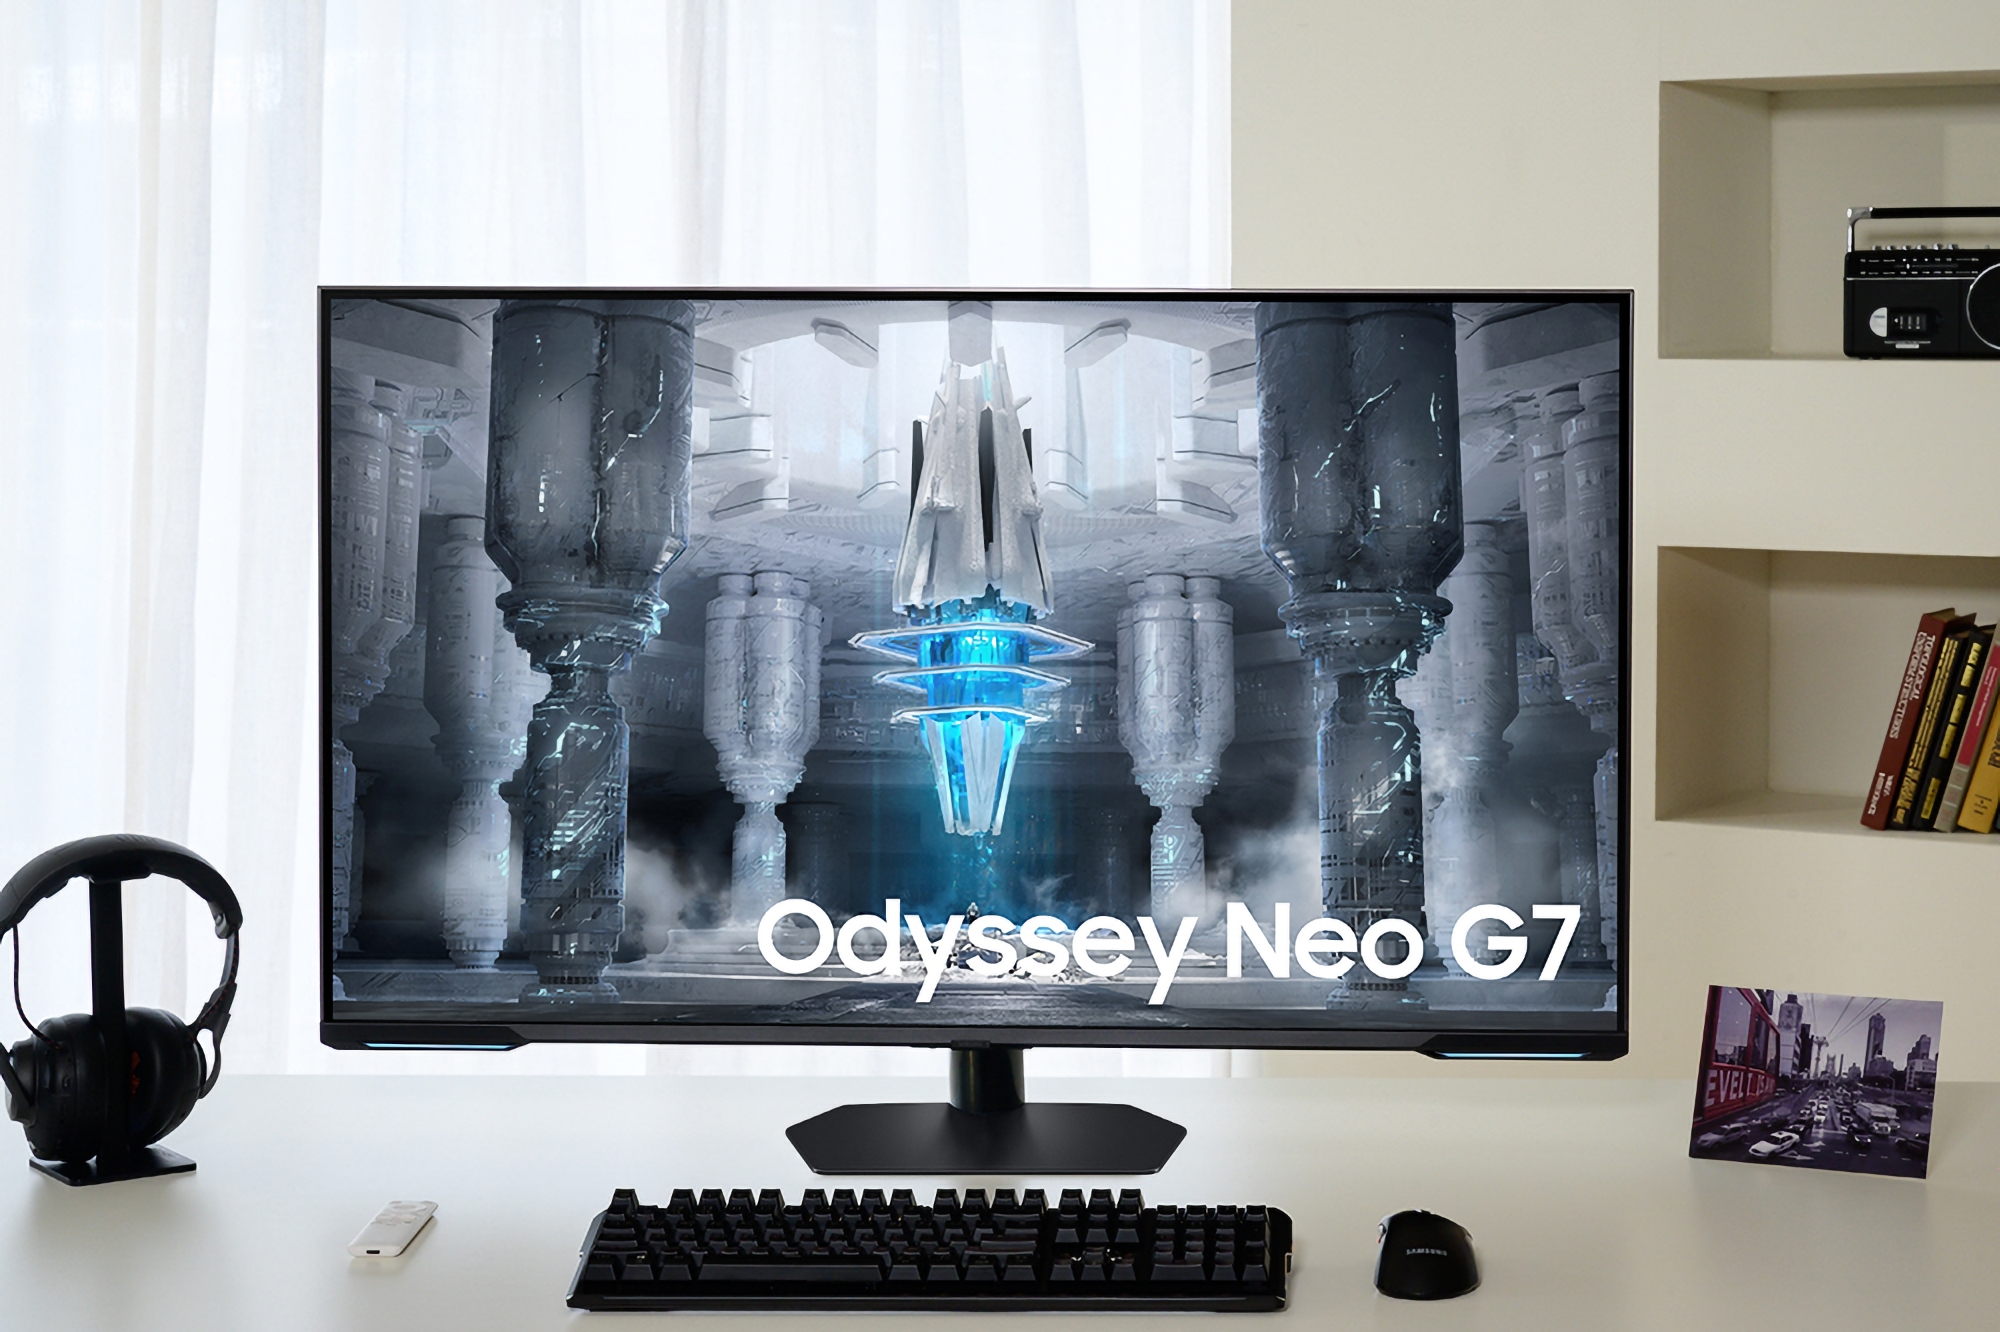 Samsung has revealed when the Odyssey Neo G7 (G70NC) 43-inch 4K Mini LED gaming monitor at 144Hz will hit the global market